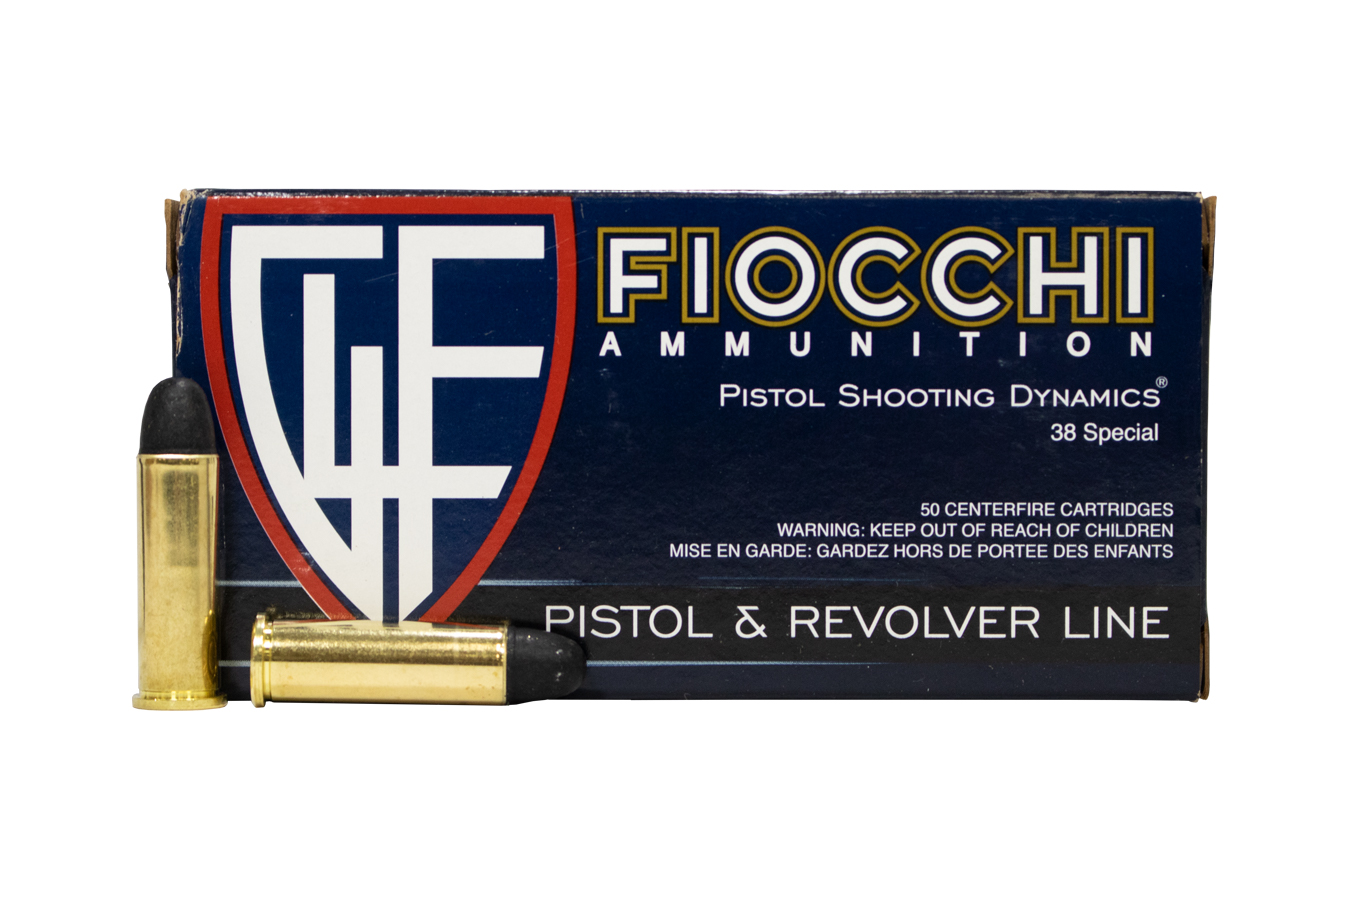 FIOCCHI 38 SPECIAL 158 GR LEAD ROUND NOSE PISTOL SHOOTING DYNAMICS 50/BOX